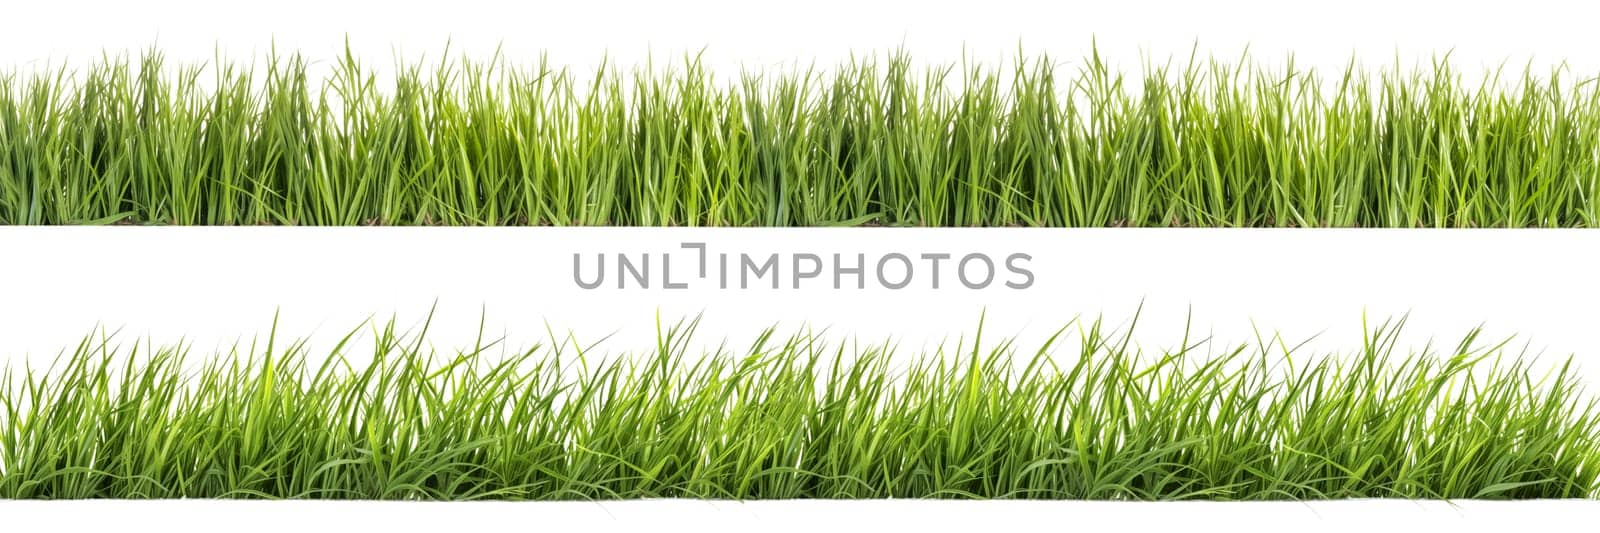 A set of long horizontal stripes of green grass cut out on a transparent background in PNG format. A strip of grass with various sprouts, side view, close-up